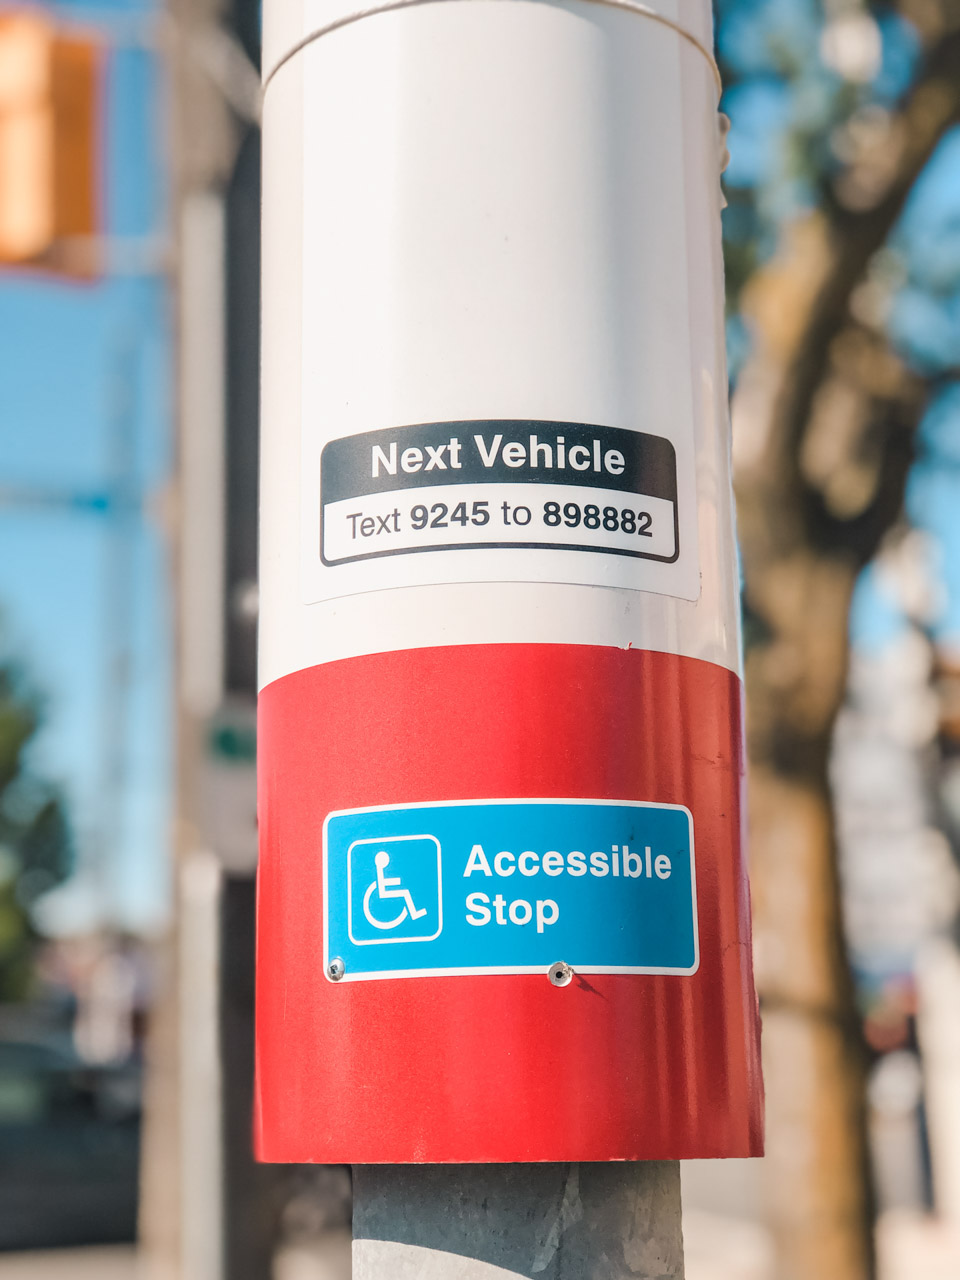 A post at a bus stop in Toronto, Canada